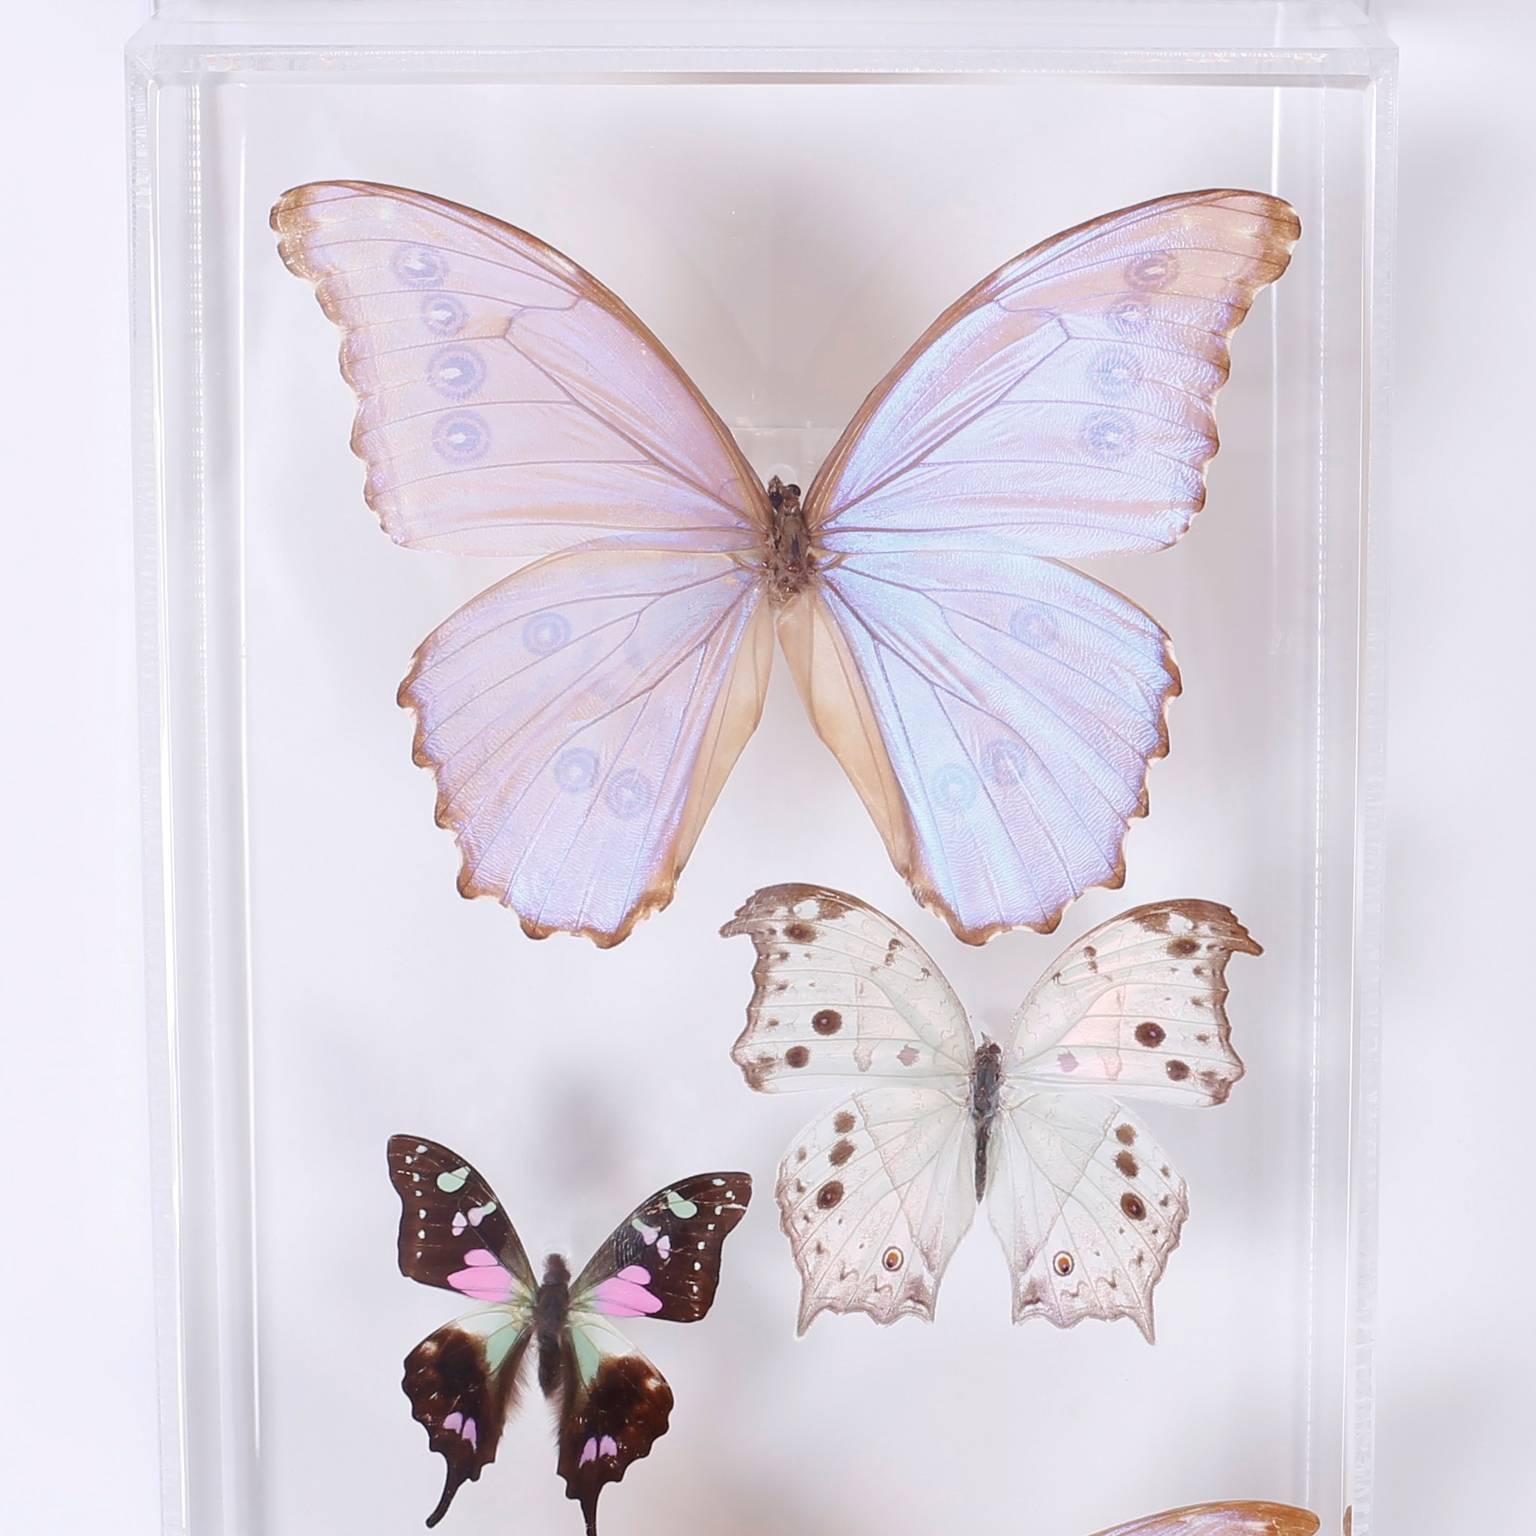 Exotic butterfly specimens presented in custom Lucite display or
shadow boxes, each with thirteen butterflies and signed in the lower
left by its creator.
 